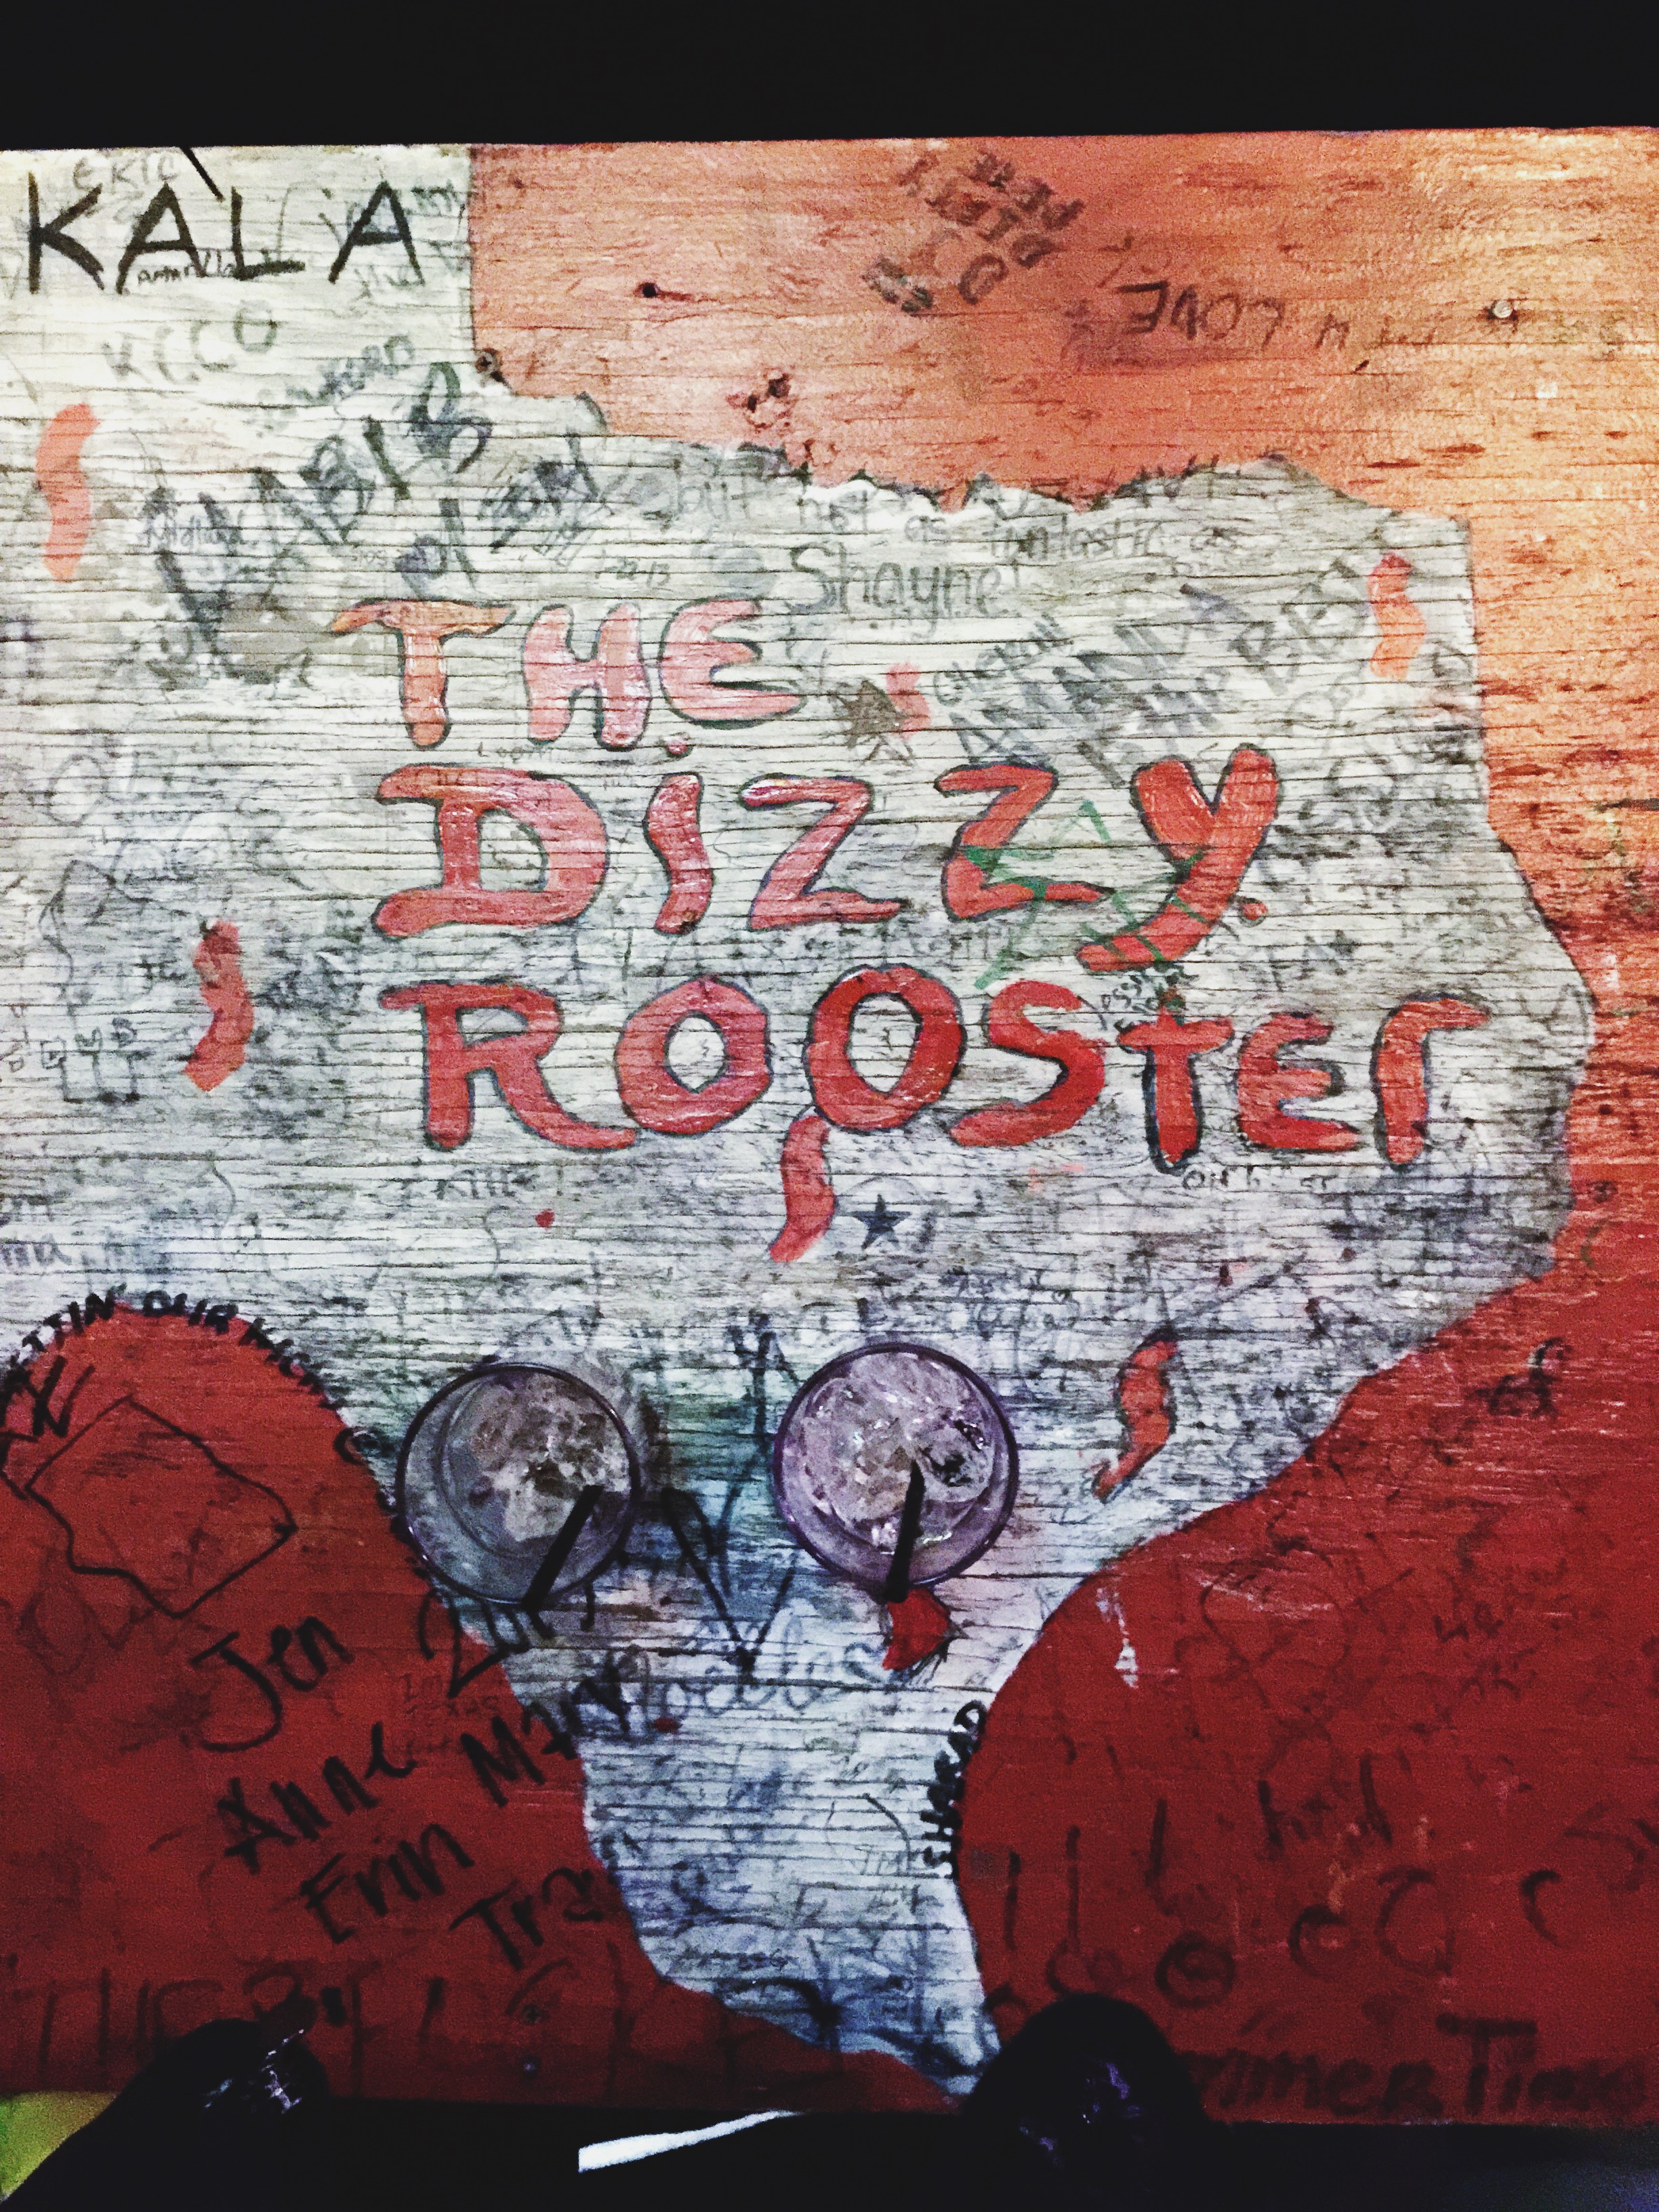   {the dizzy rooster, one of our many stops on sixth street.}  